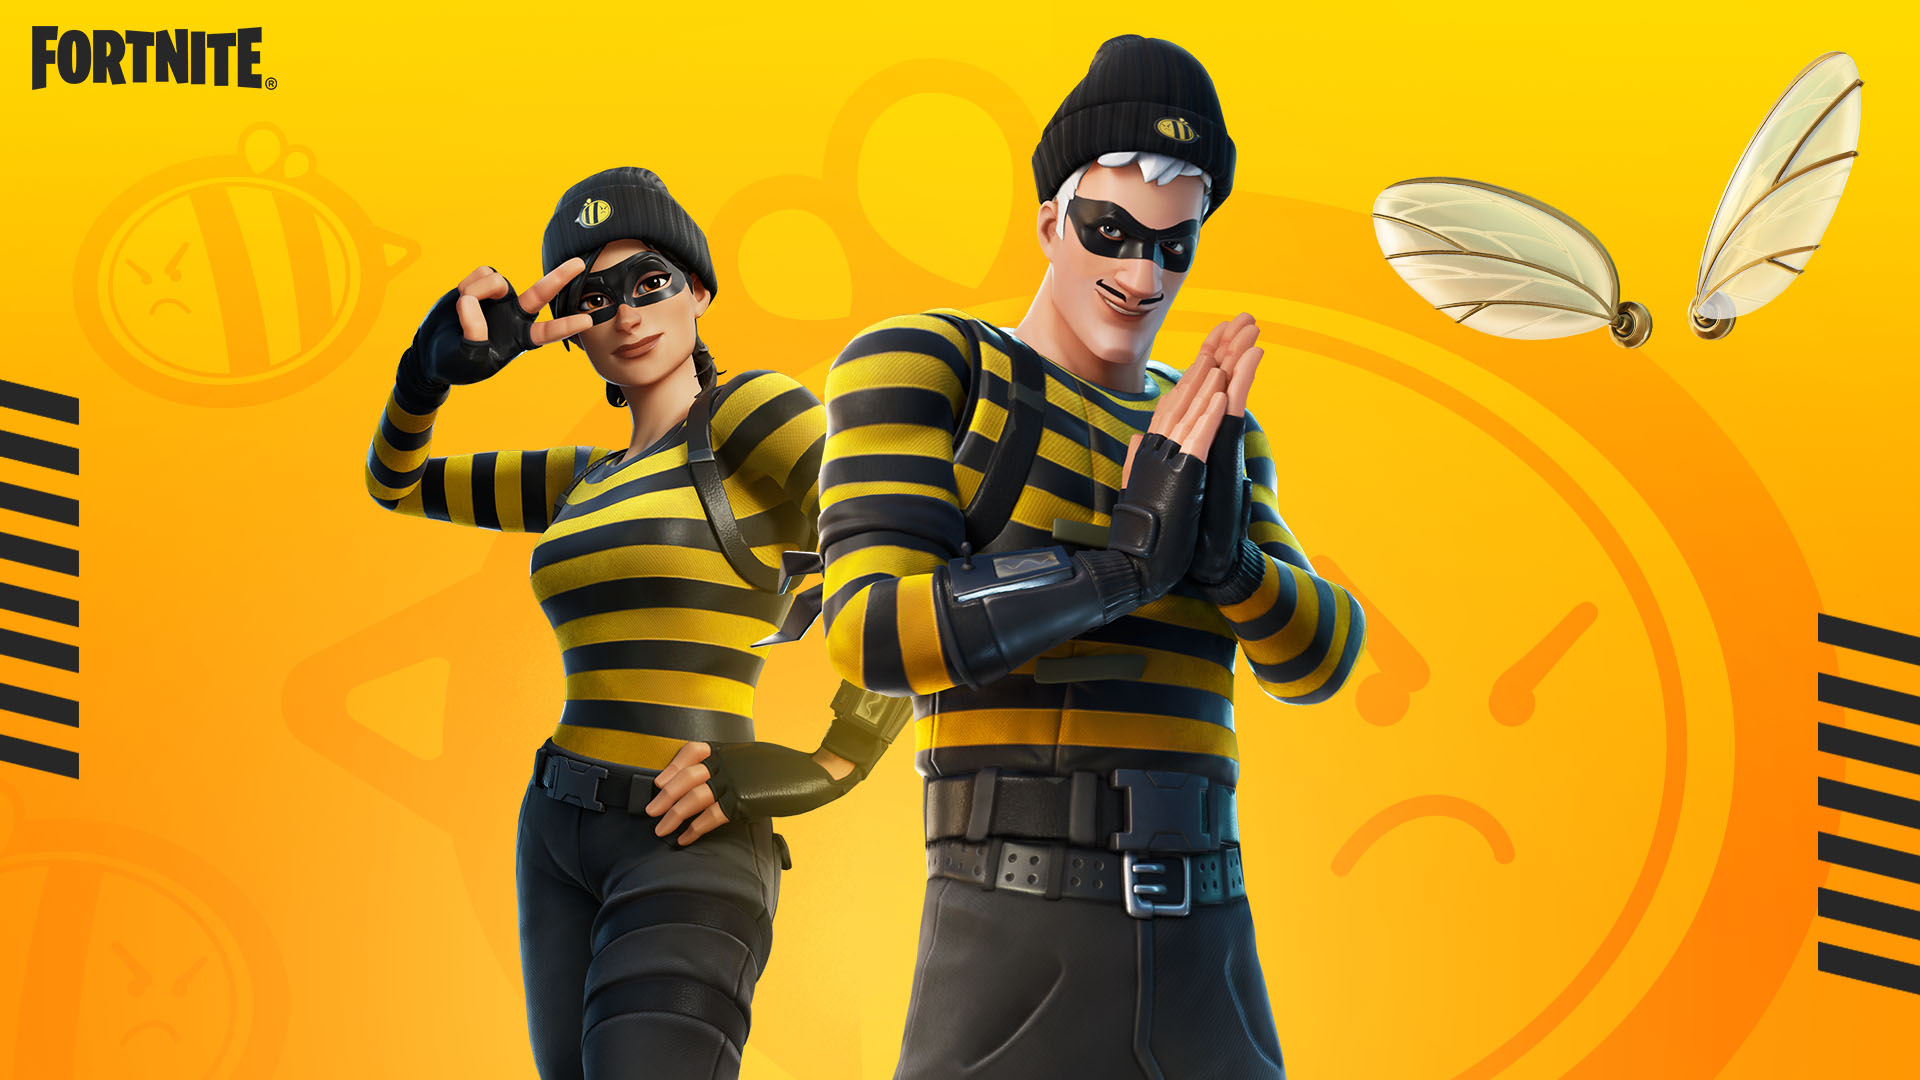 Fortnite on a good thief recognizes a style thats worth stealing grab the rapscallion and scoundrel outfits now with new styles httpstcoavlruv